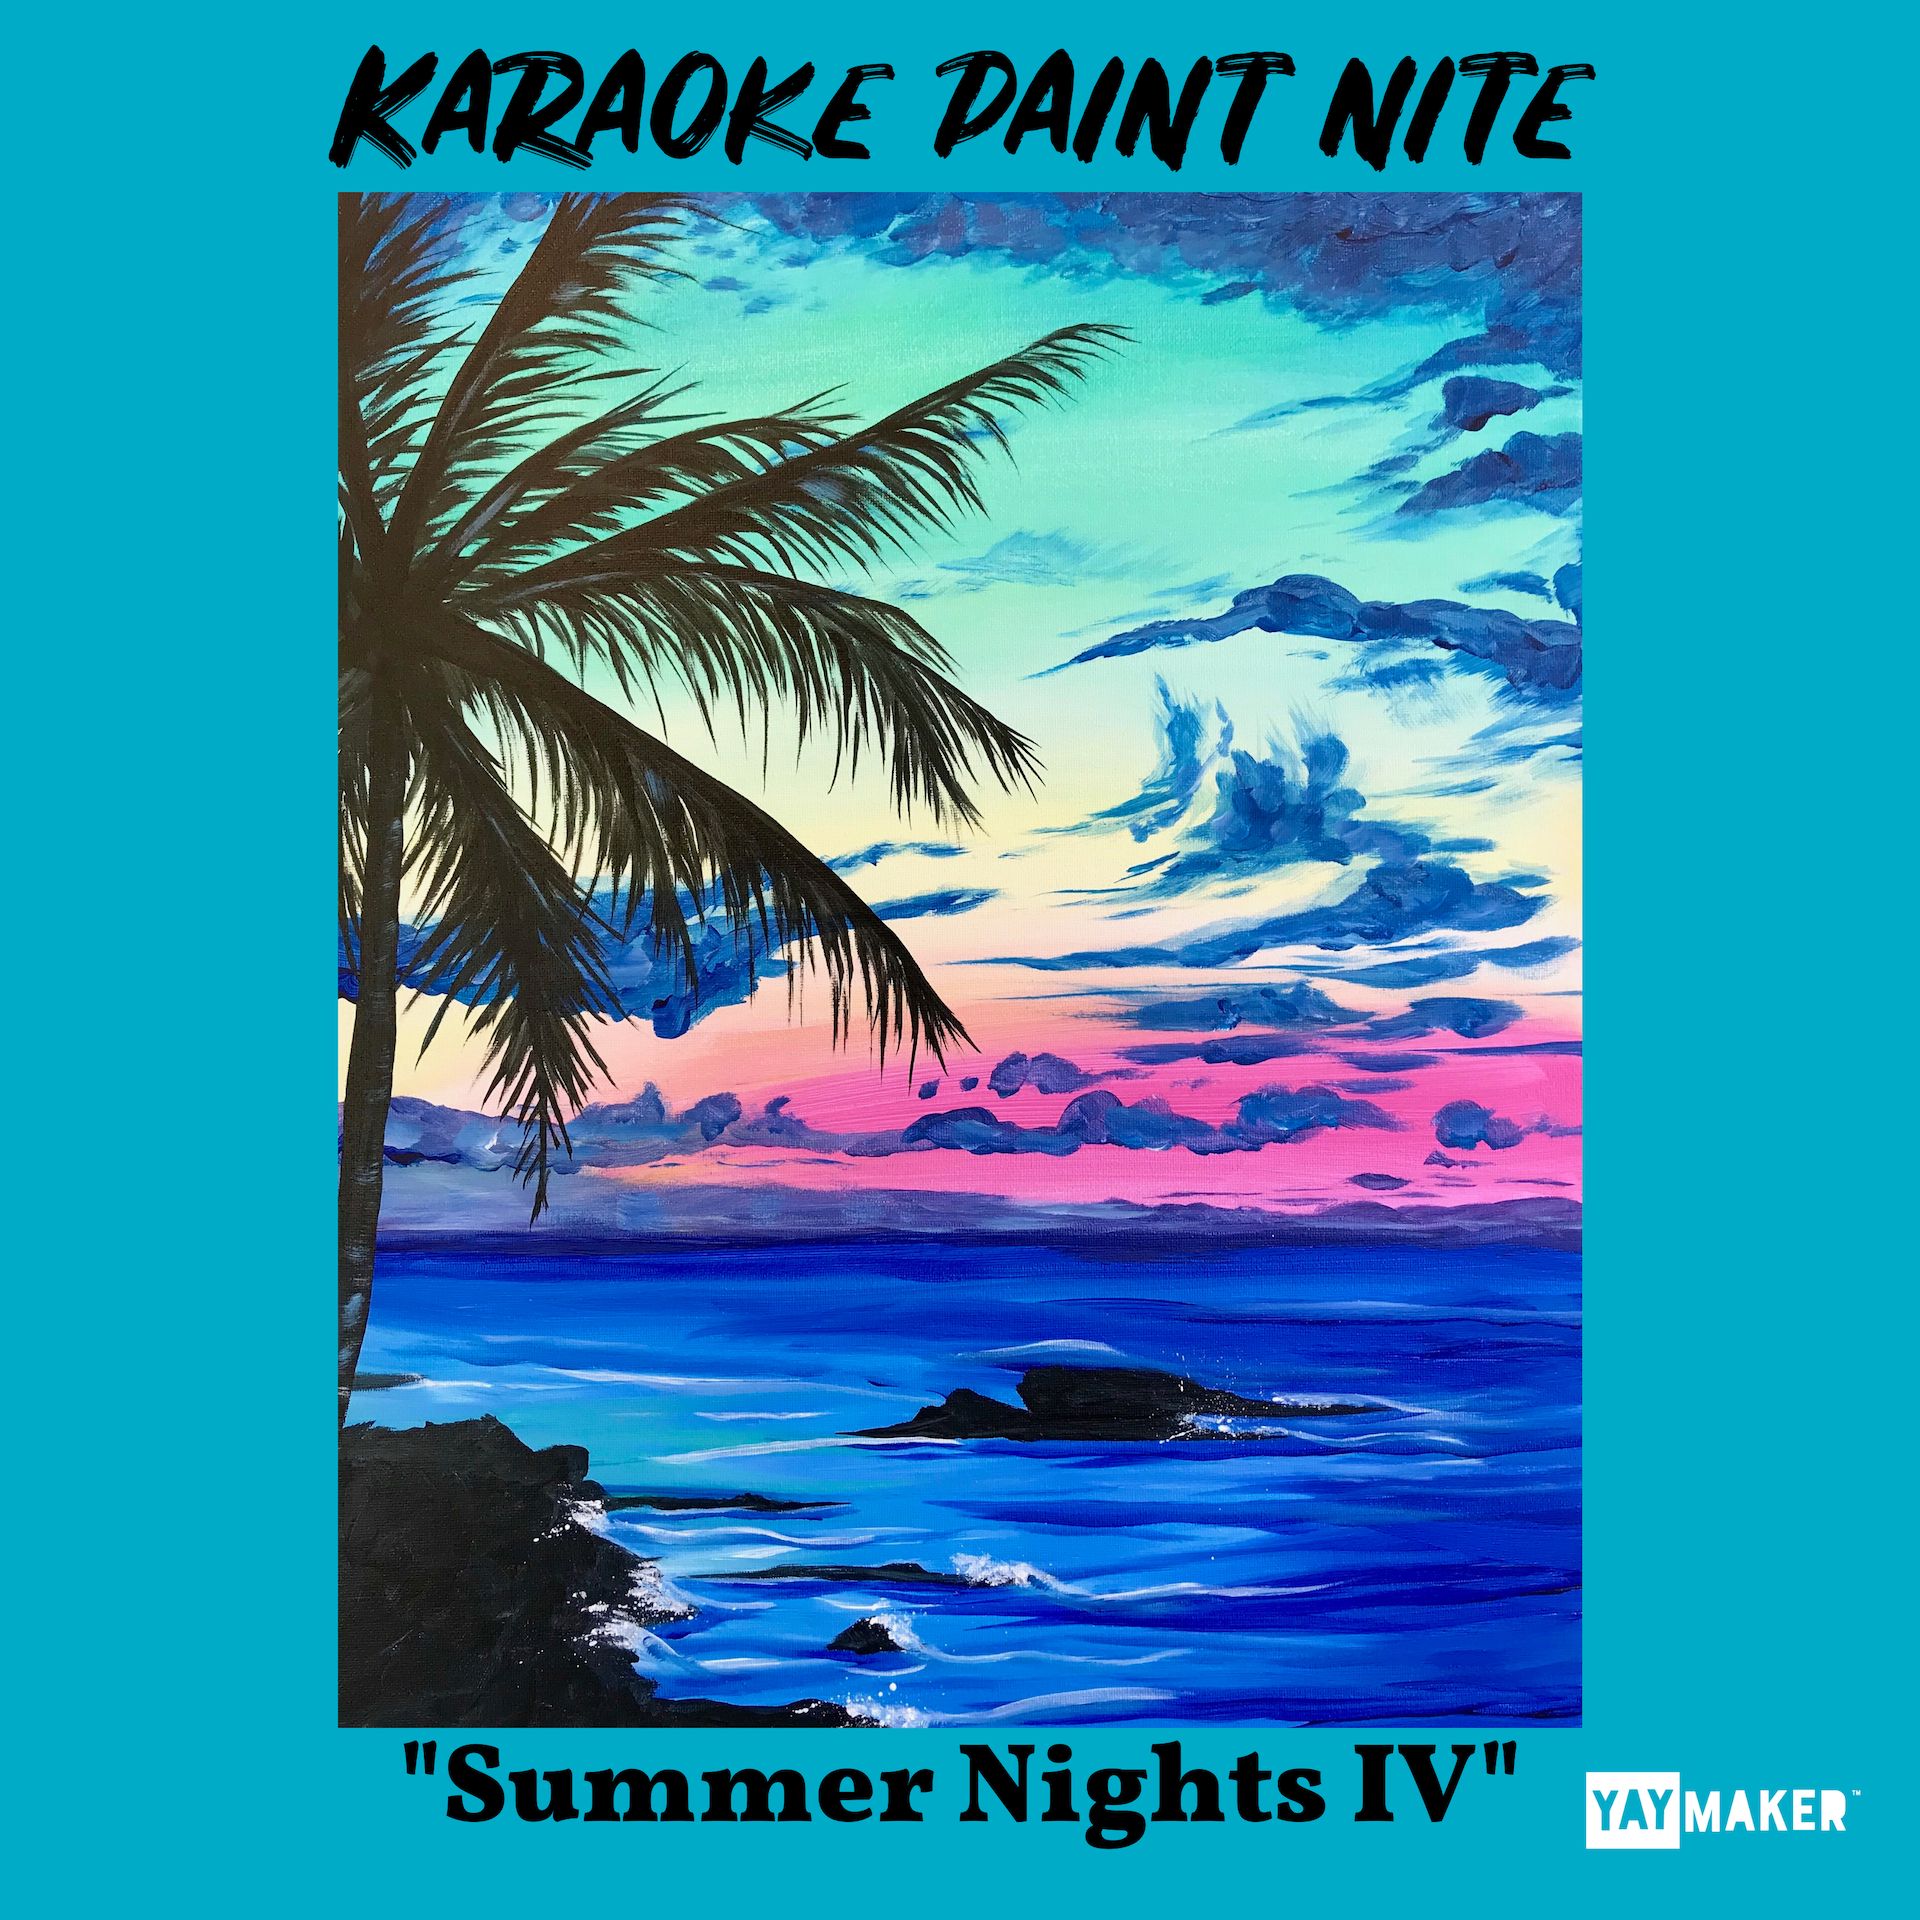 A KARAOKE Paint Nite Summer Nights experience project by Yaymaker